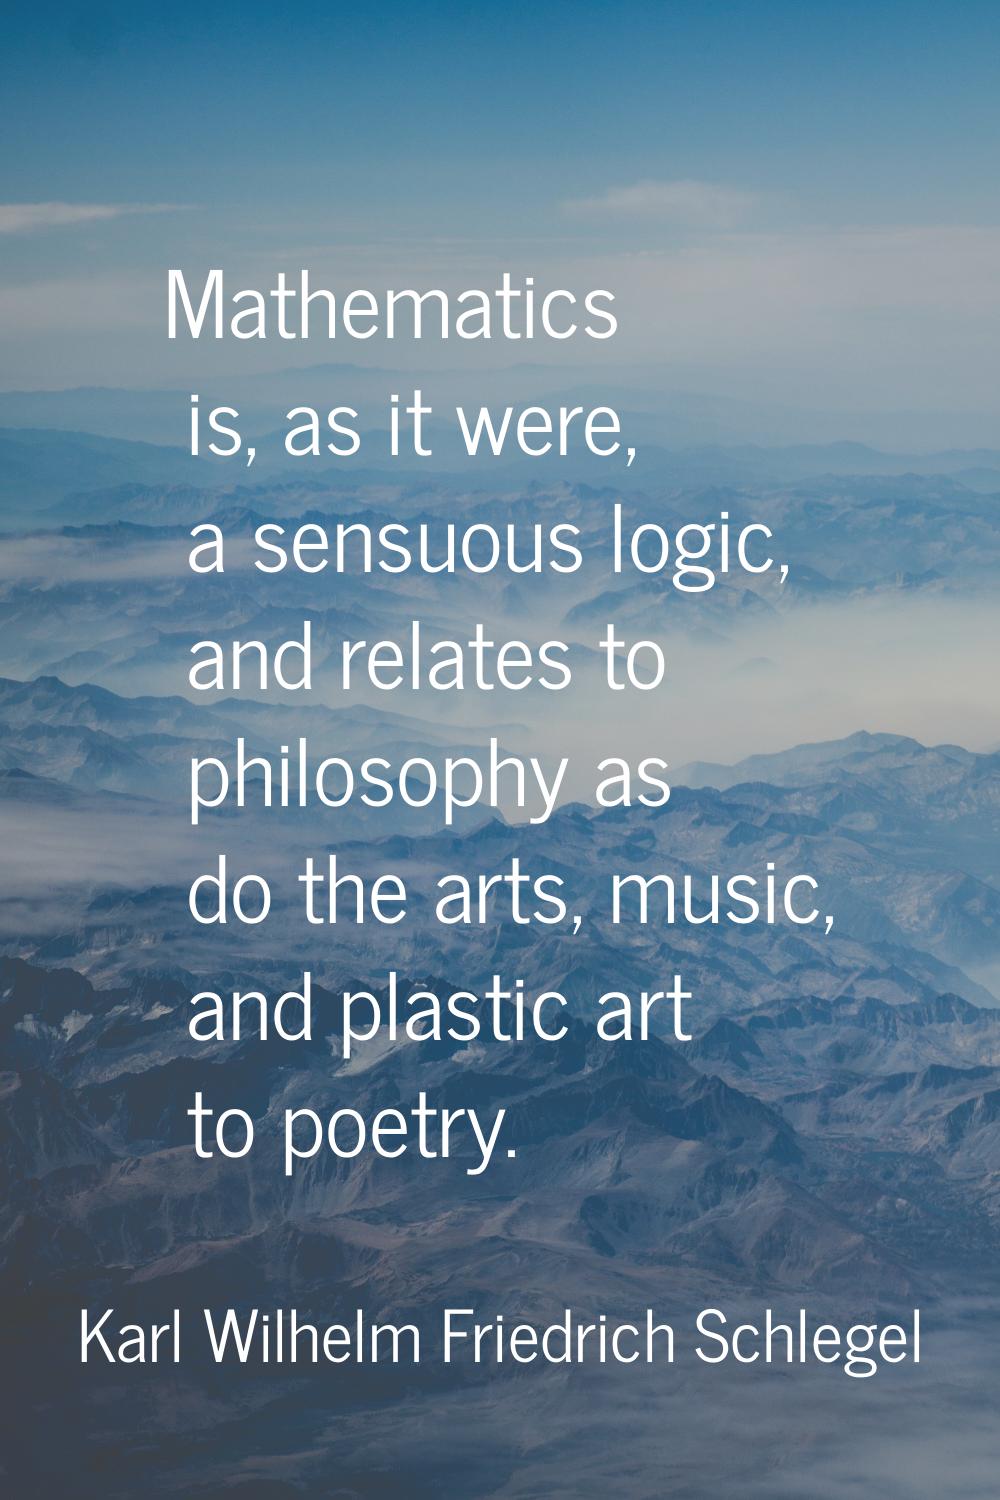 Mathematics is, as it were, a sensuous logic, and relates to philosophy as do the arts, music, and 